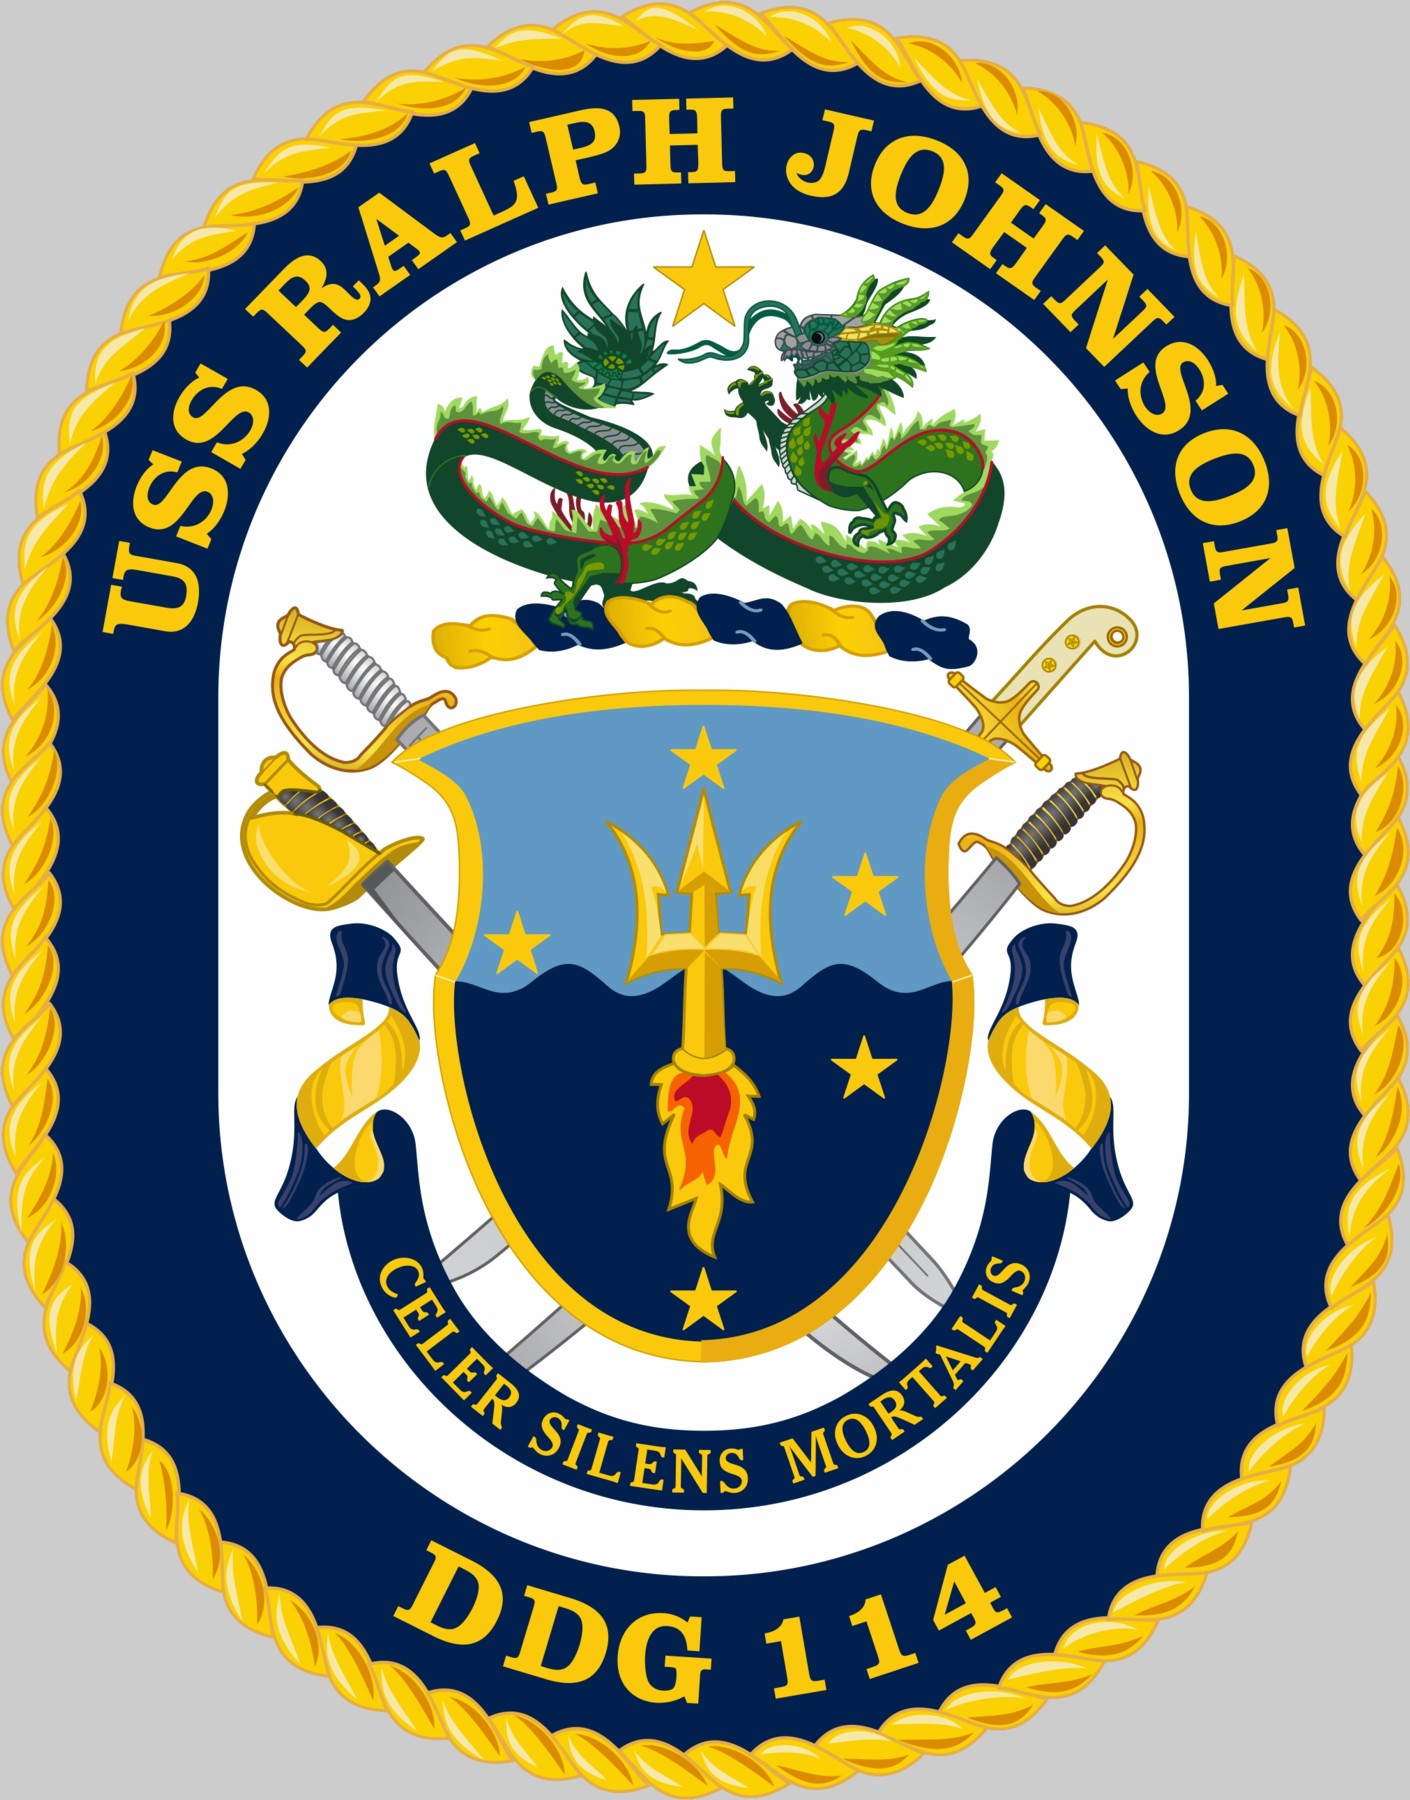 ddg-114 uss ralph johnson insignia crest patch badge arleigh burke class guided missile destroyer us navy aegis 02c